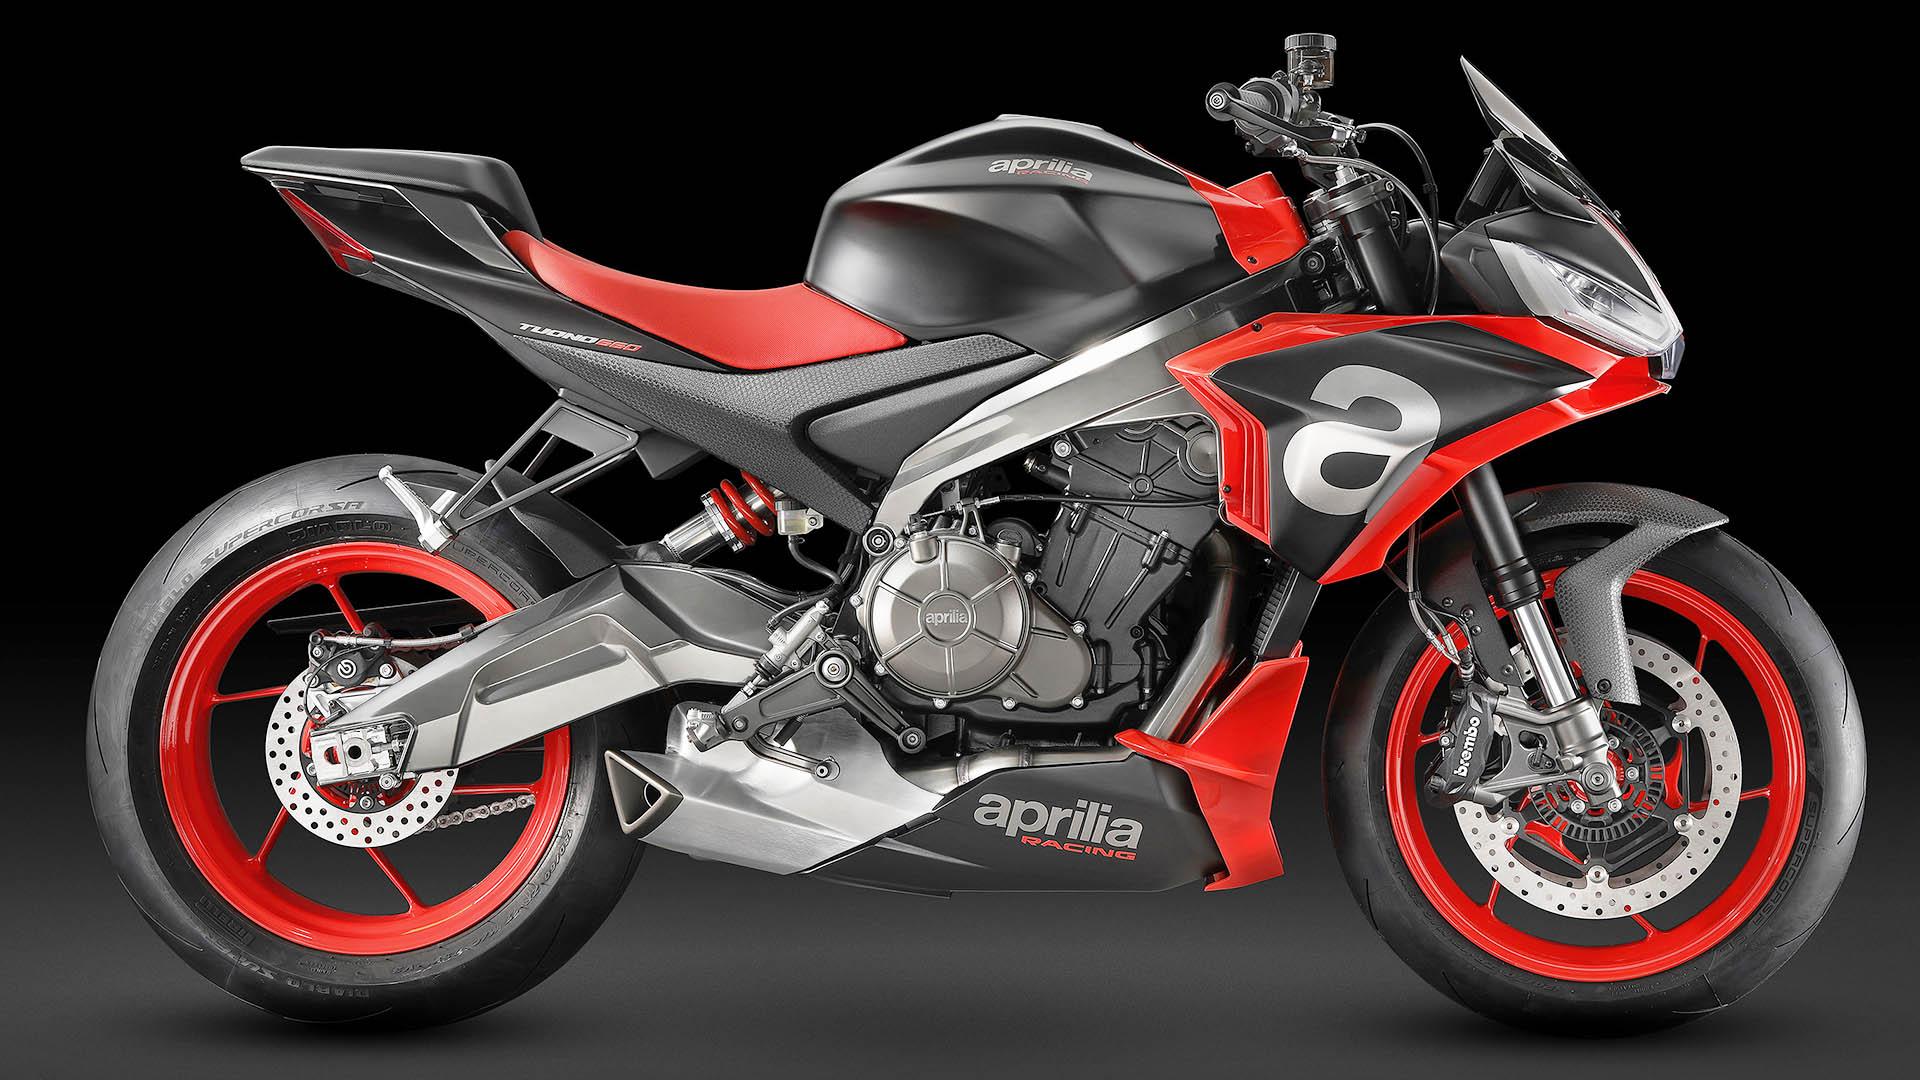 Aprilia Tuono 660 Concept Motorcycle First Look: Upright Middleweight